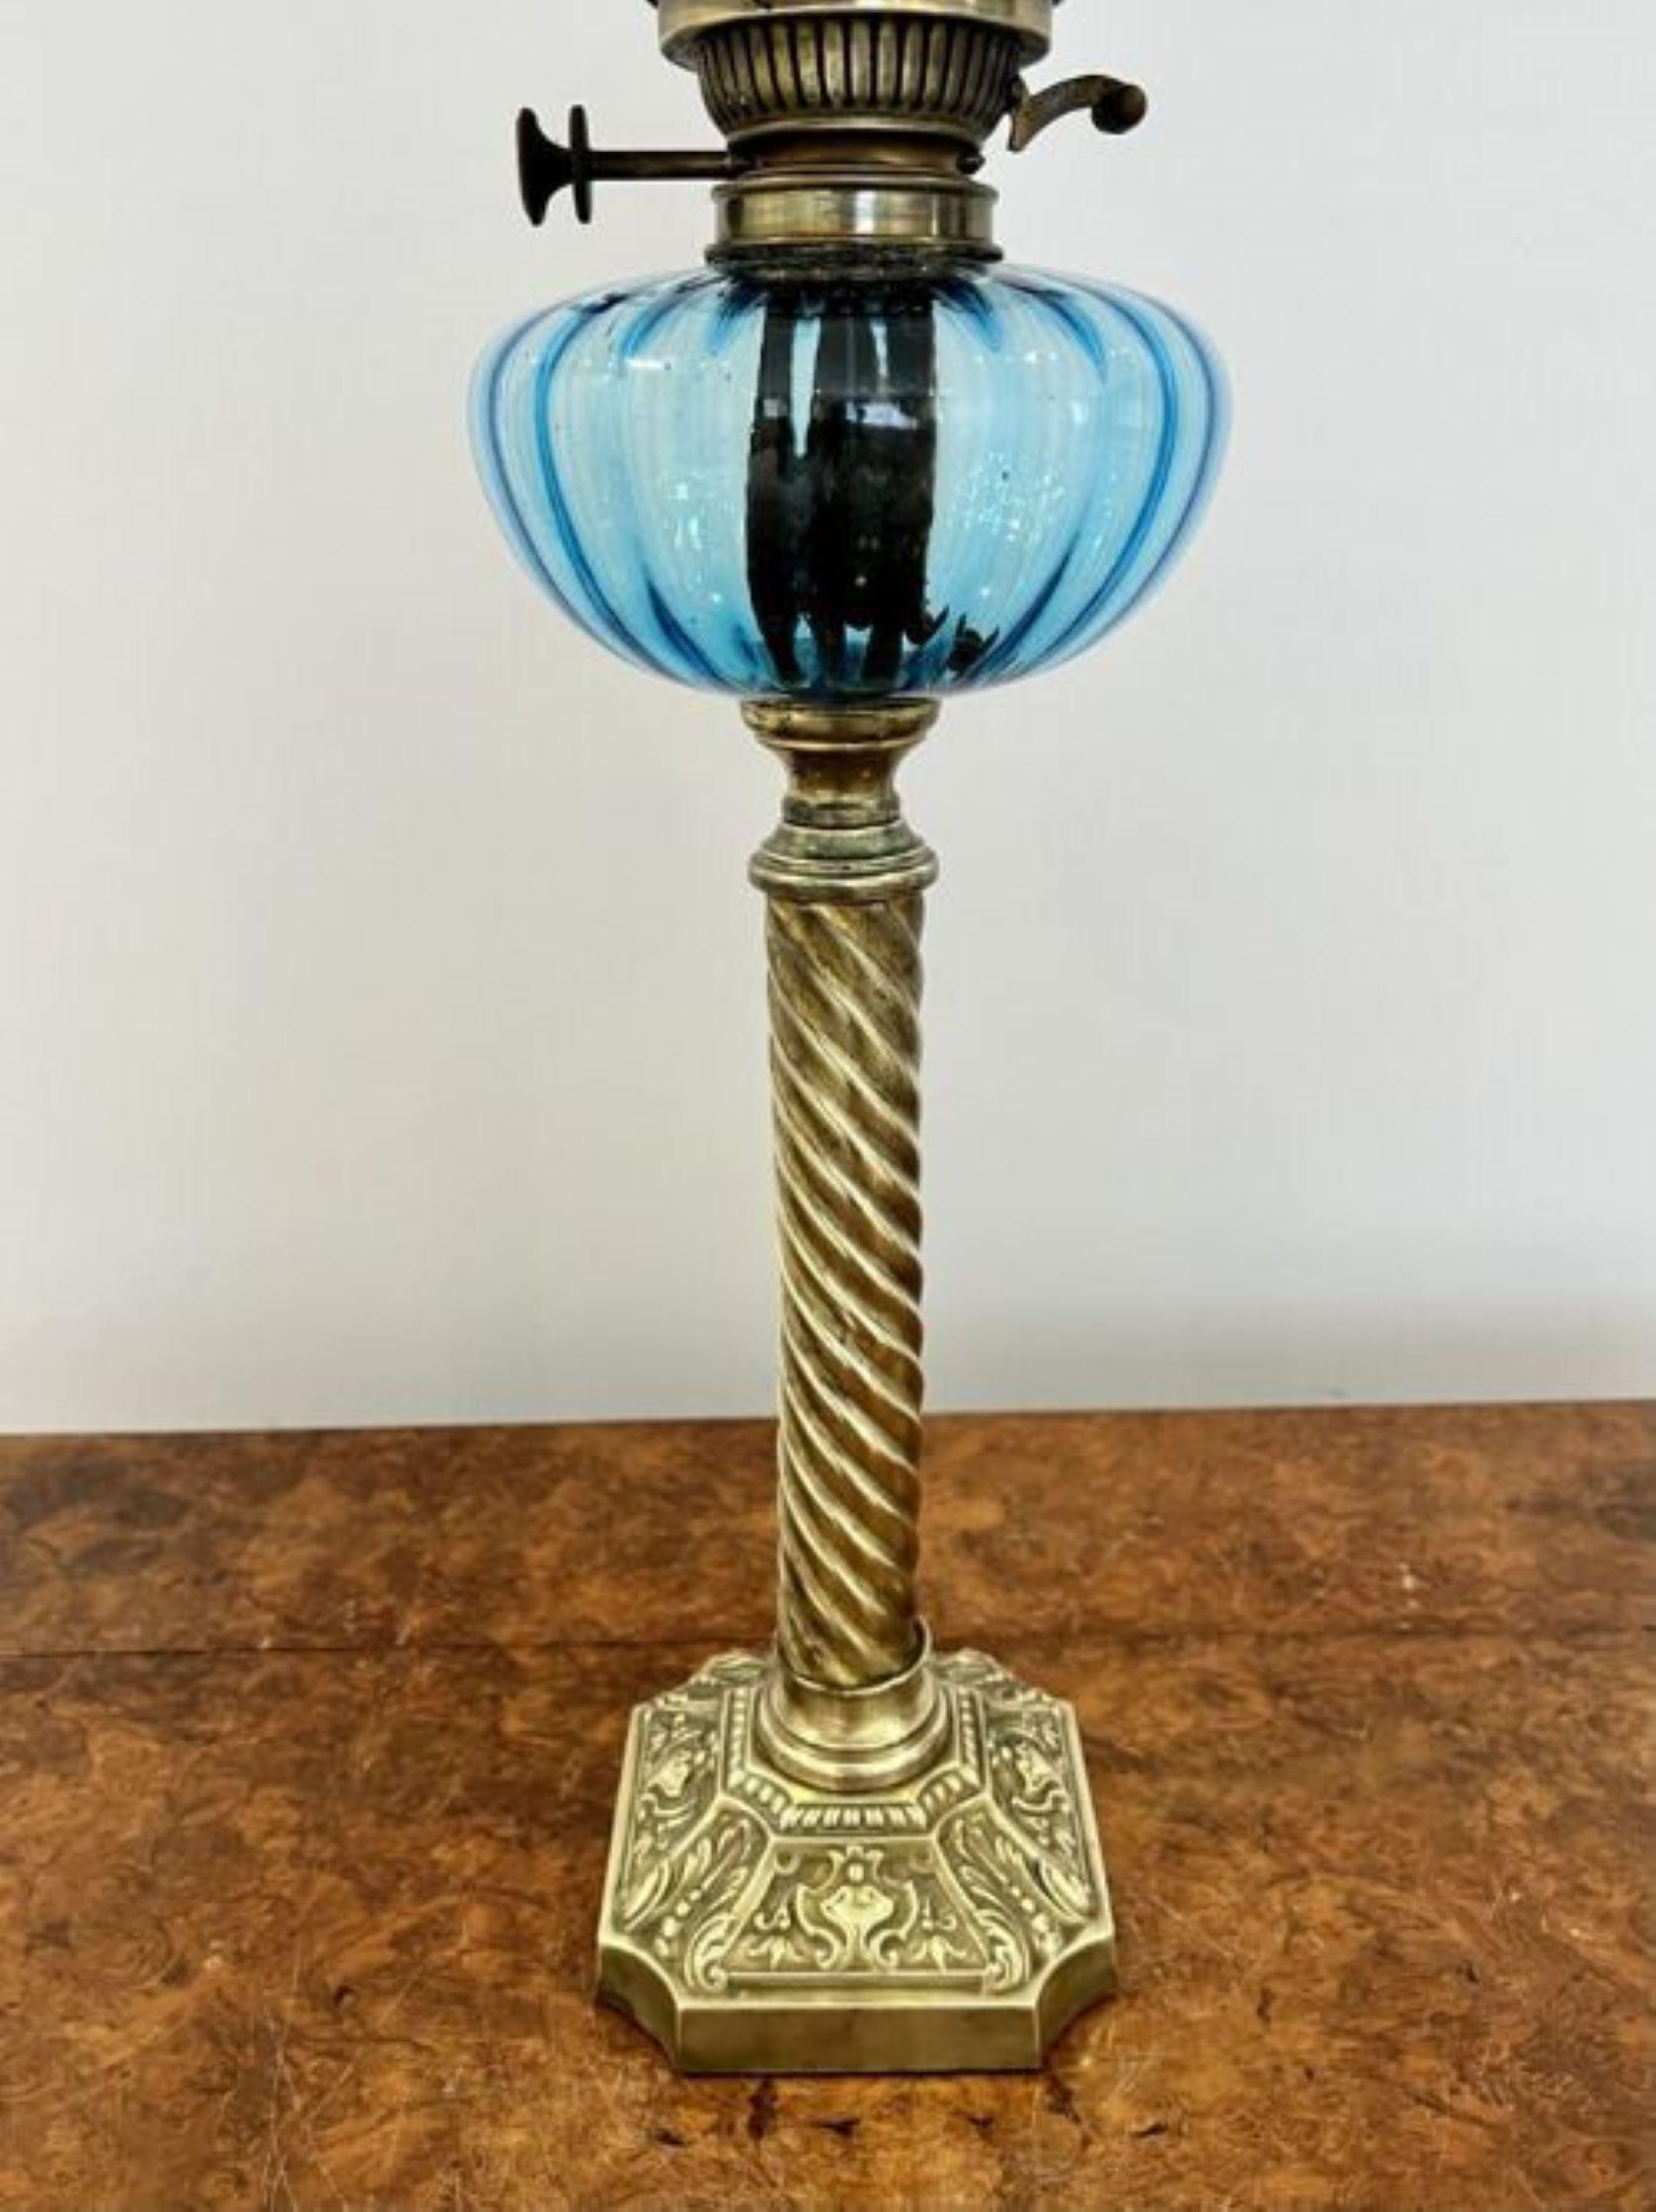 Quality antique Victorian oil lamp having a quality blue glass reservoir supported by a brass rope twist column standing on a square ornate base 